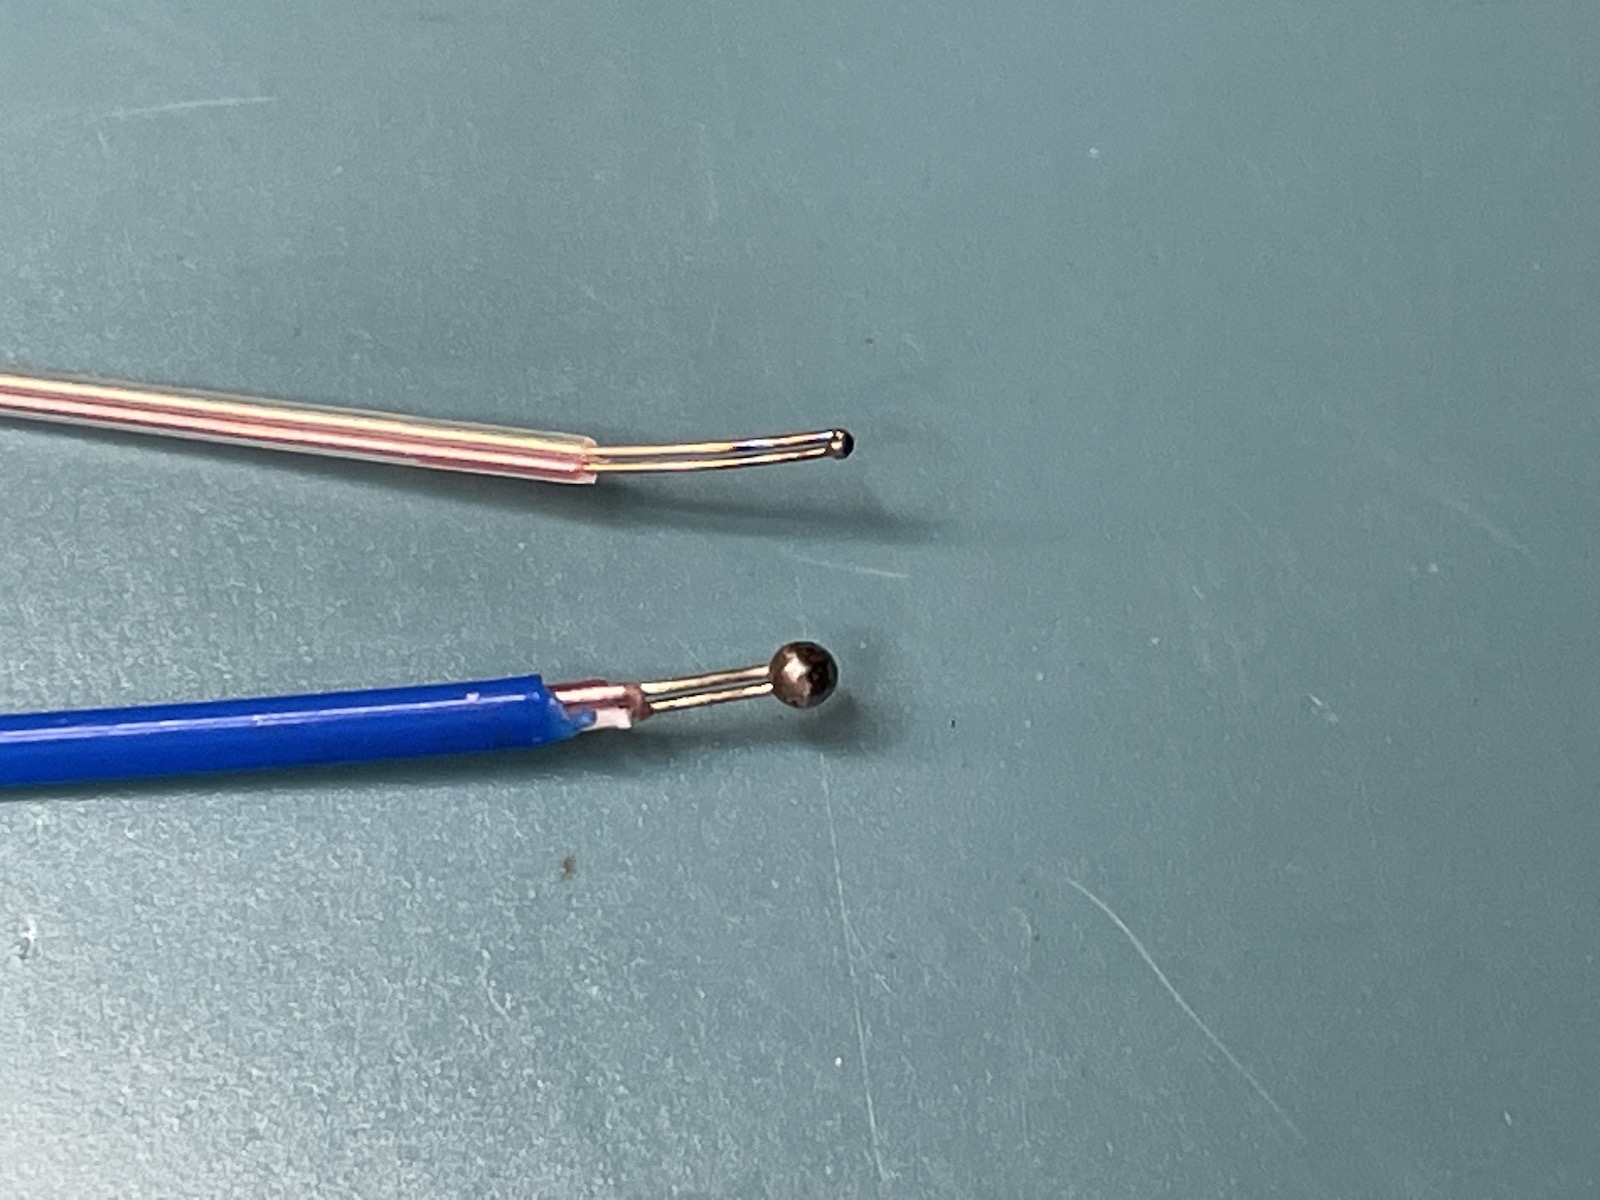 Two different thermocouples, zoomed in on the welded point